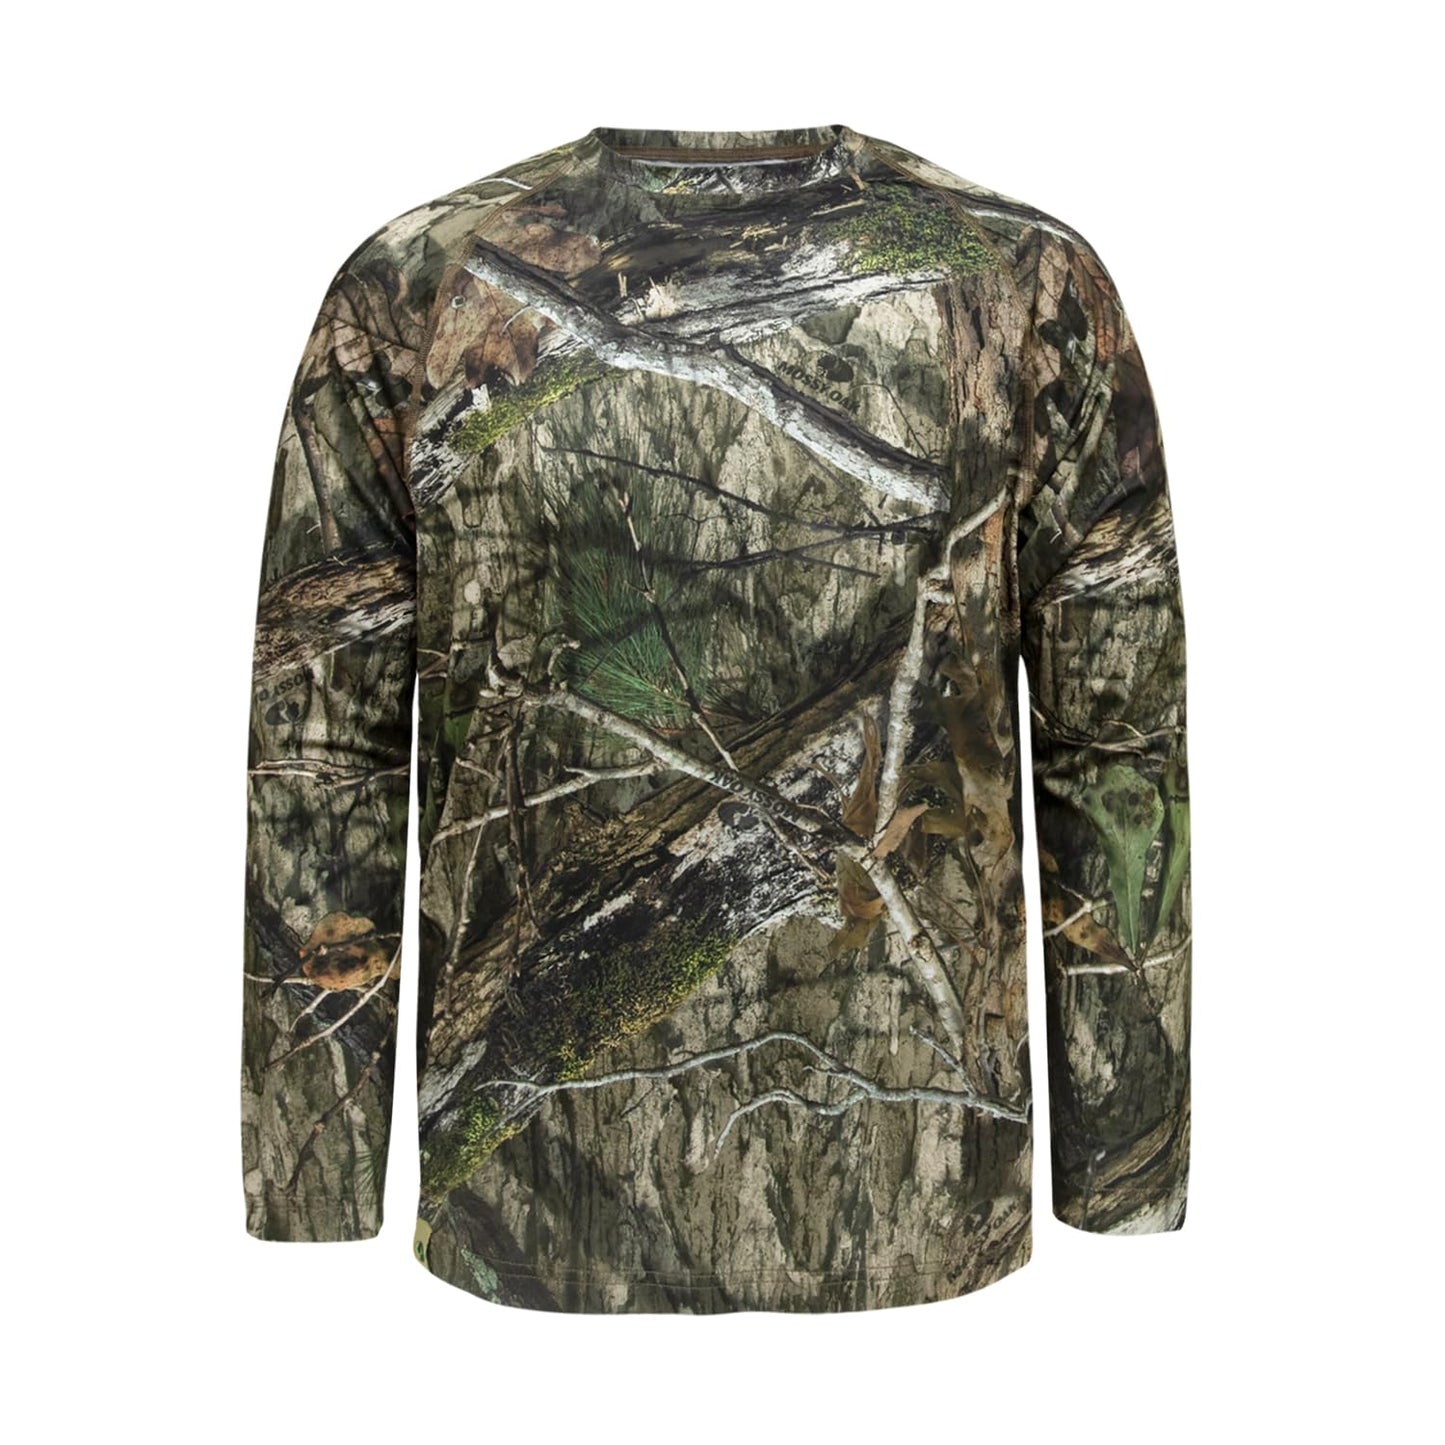 Mossy Oak boys Kids Hunting Clothes Youth Camo Shirt Long Sleeve Kids Hunting Clothes Youth Camo Shirt Long Sleeve